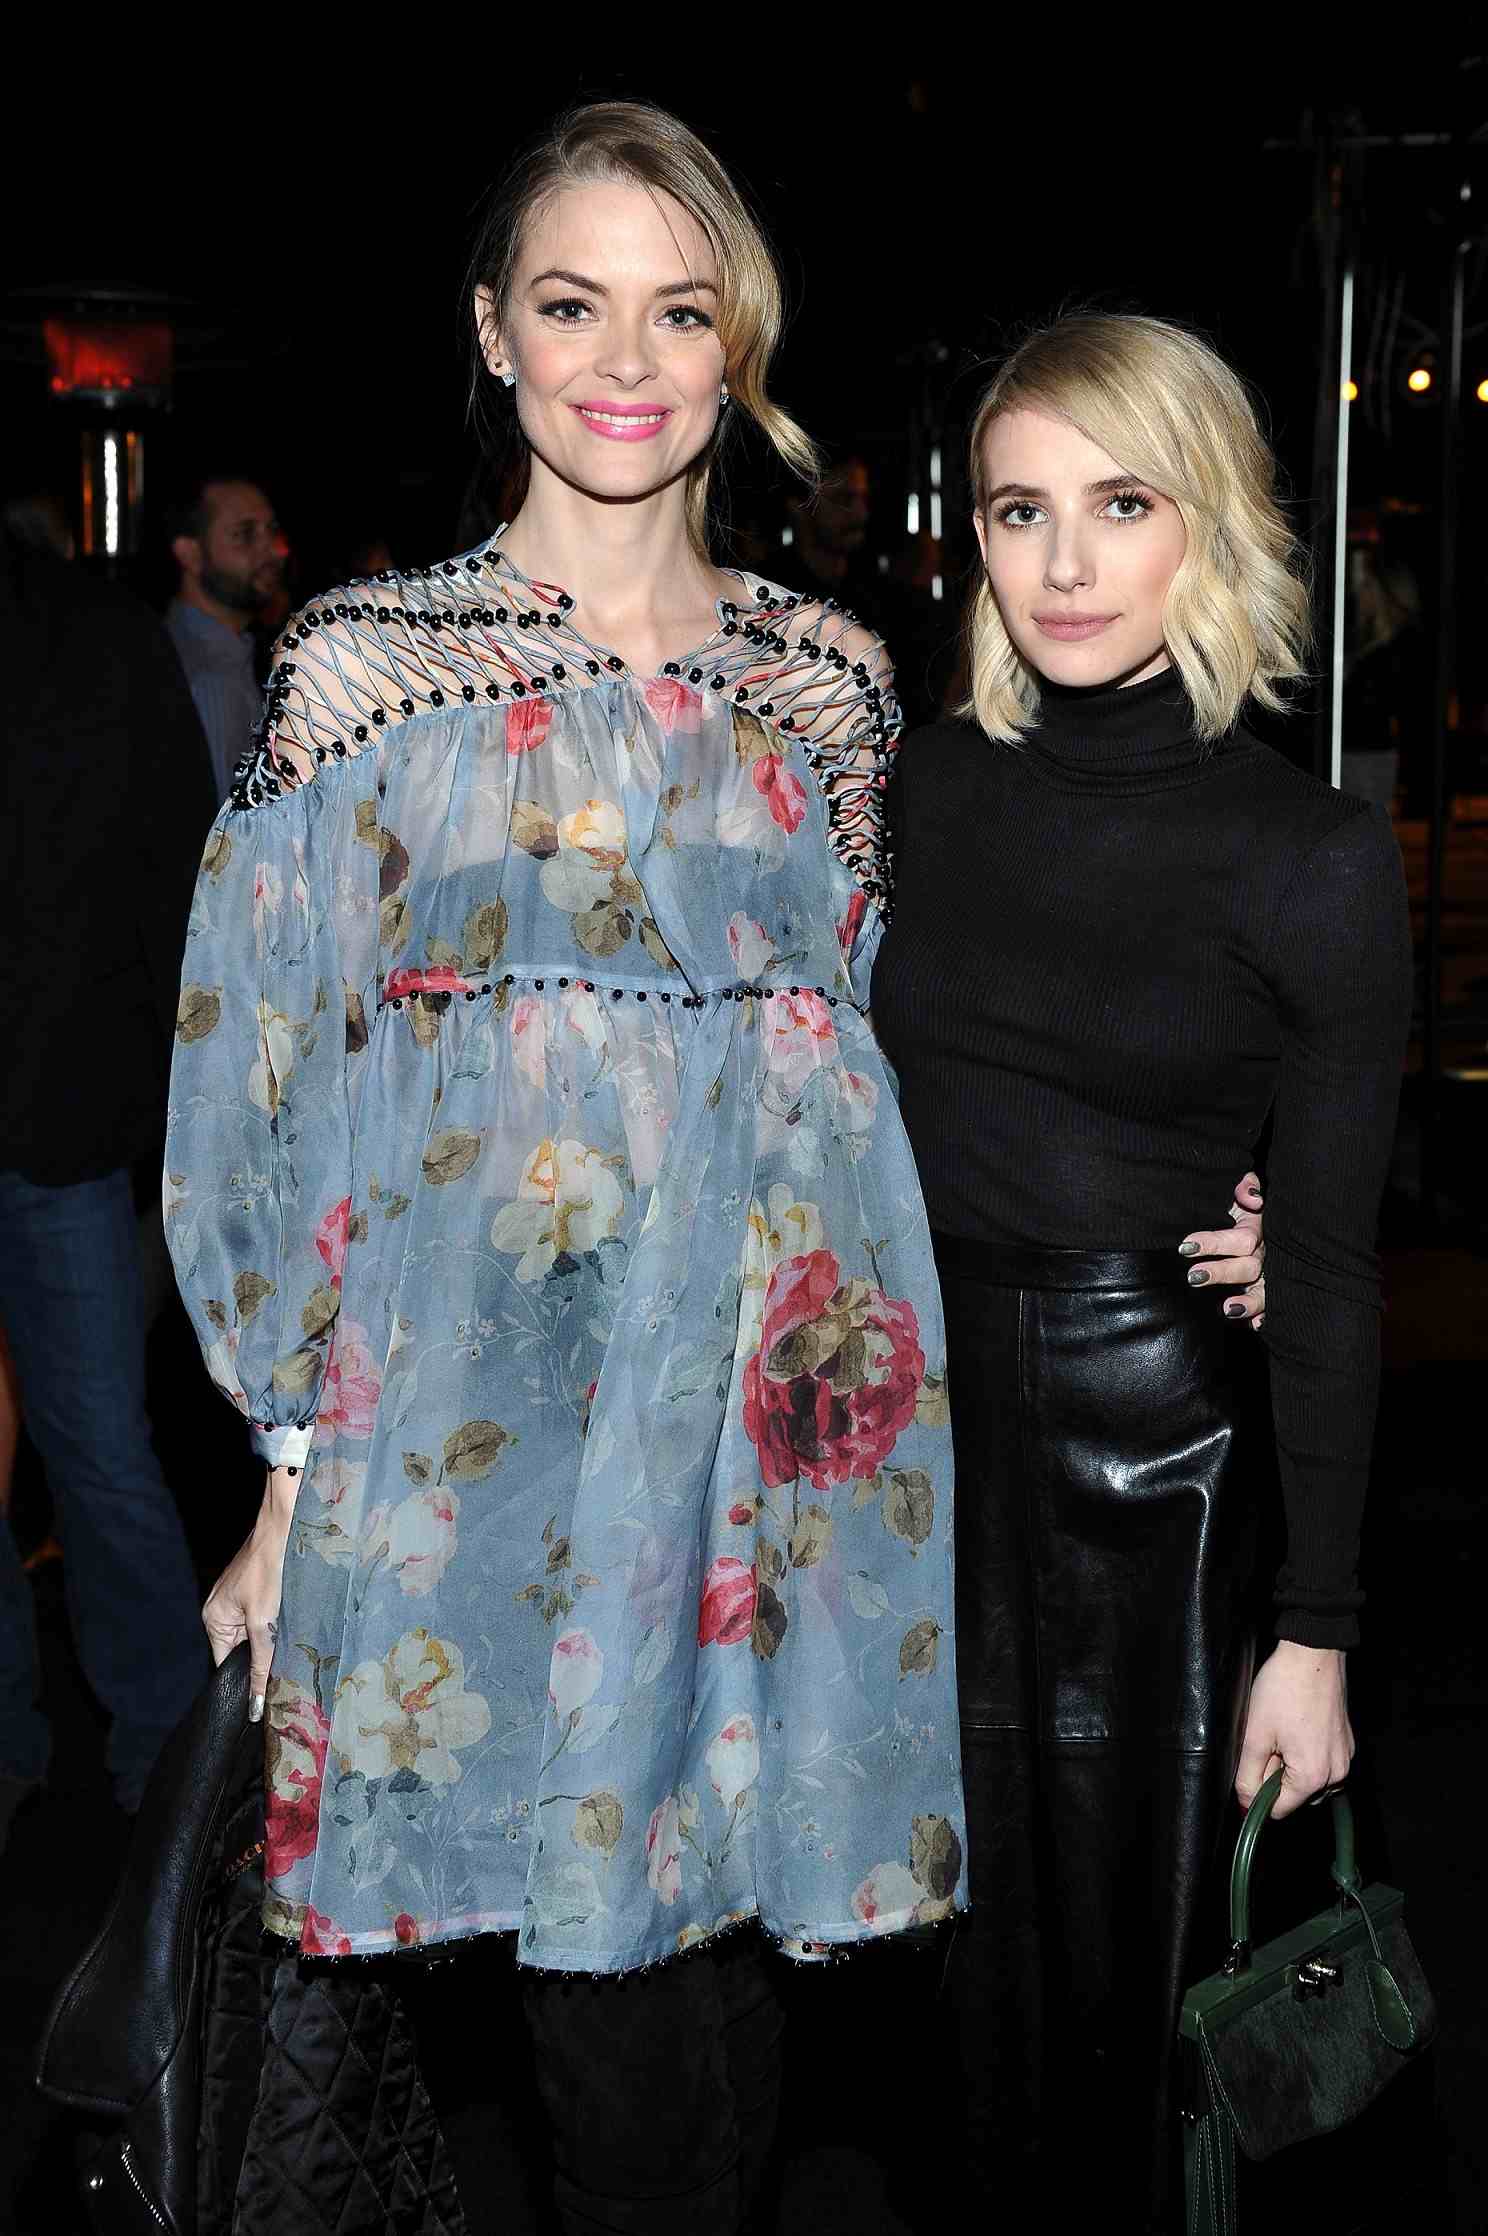 BEVERLY HILLS, CA - NOVEMBER 18: Actrresses Jaime King (L) and Emma Roberts attend Louis XIII Celebration of "100 Years" The Movie You Will Never See, starring John Malkovich at a private residence on November 18, 2015 in Beverly Hills, California. (Photo by Donato Sardella/Getty Images for Louis XIII)